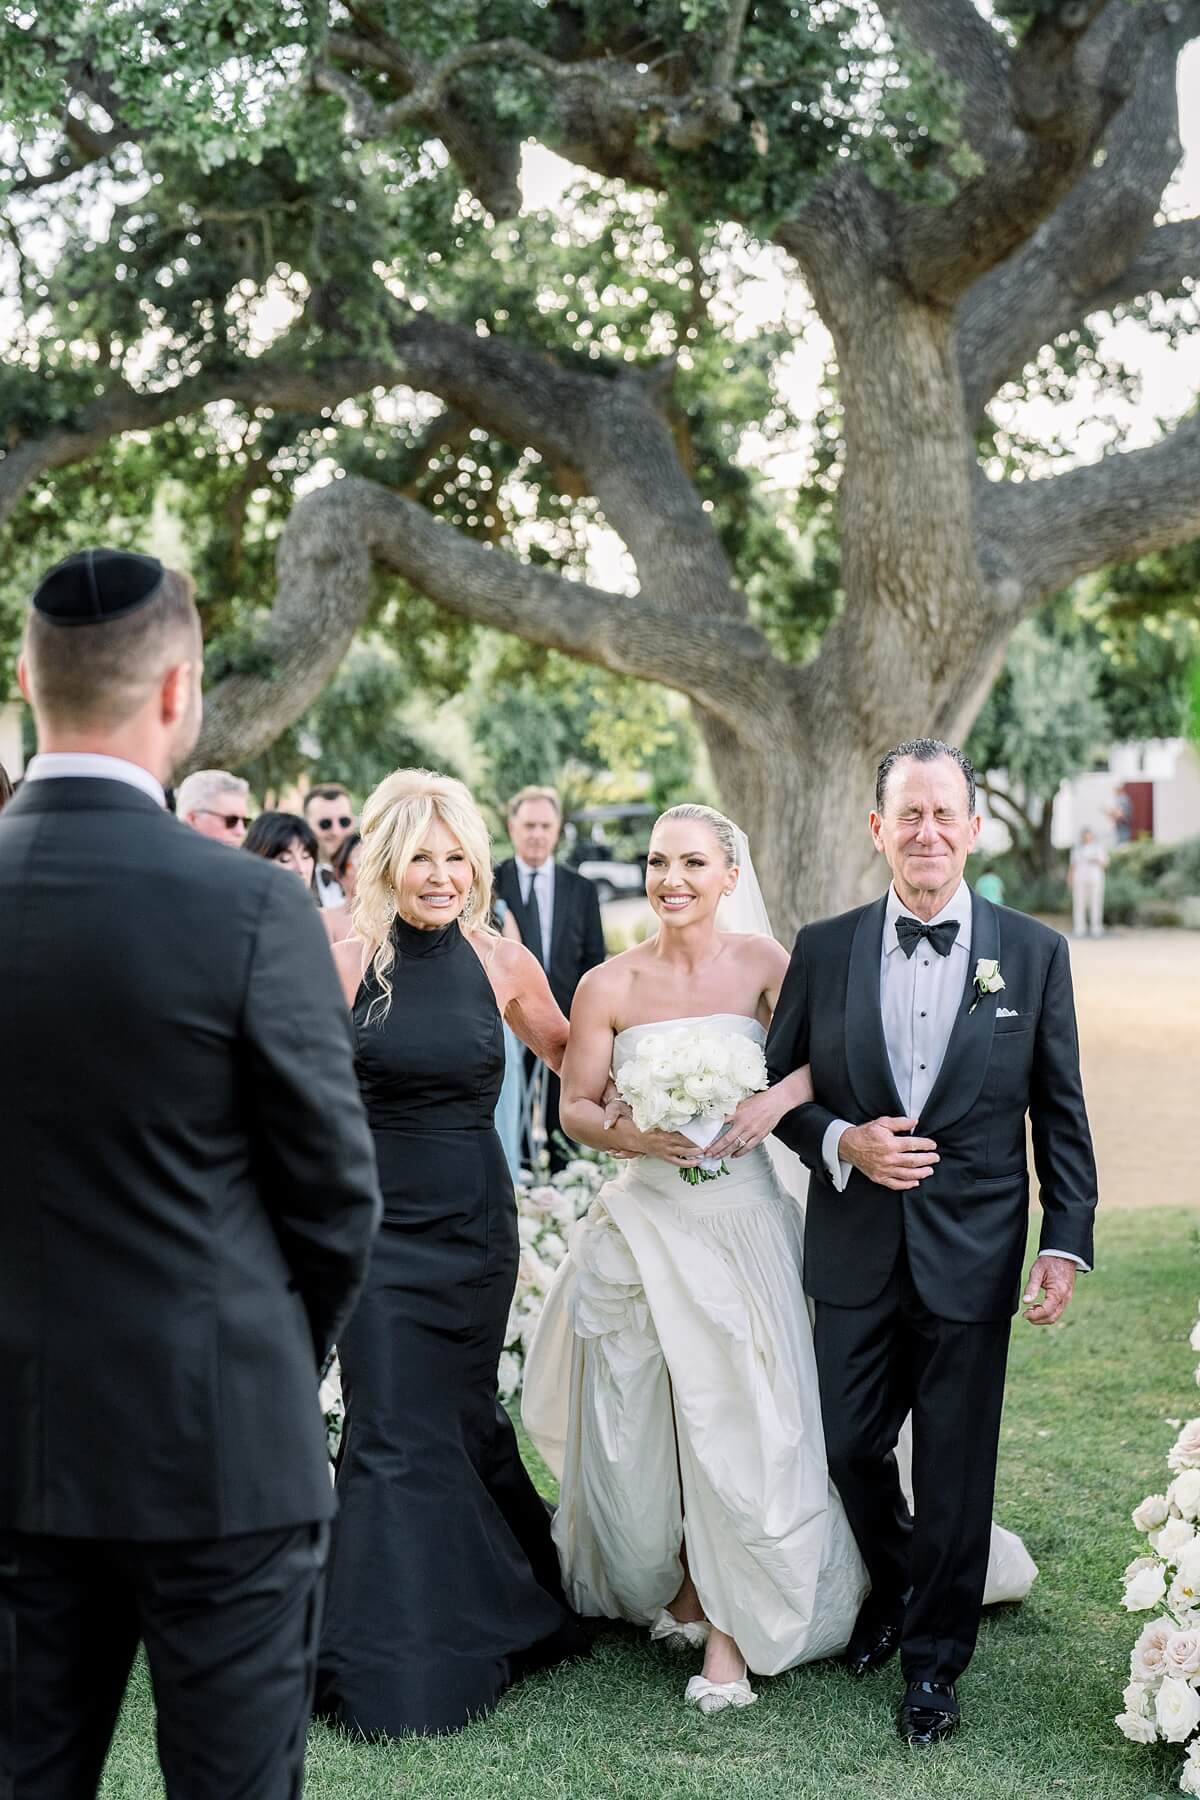 Ojai Valley Inn black tie wedding with Jewish floral chuppah, couture designer wedding gown and an emotional ceremony captured by Pattengale Photography